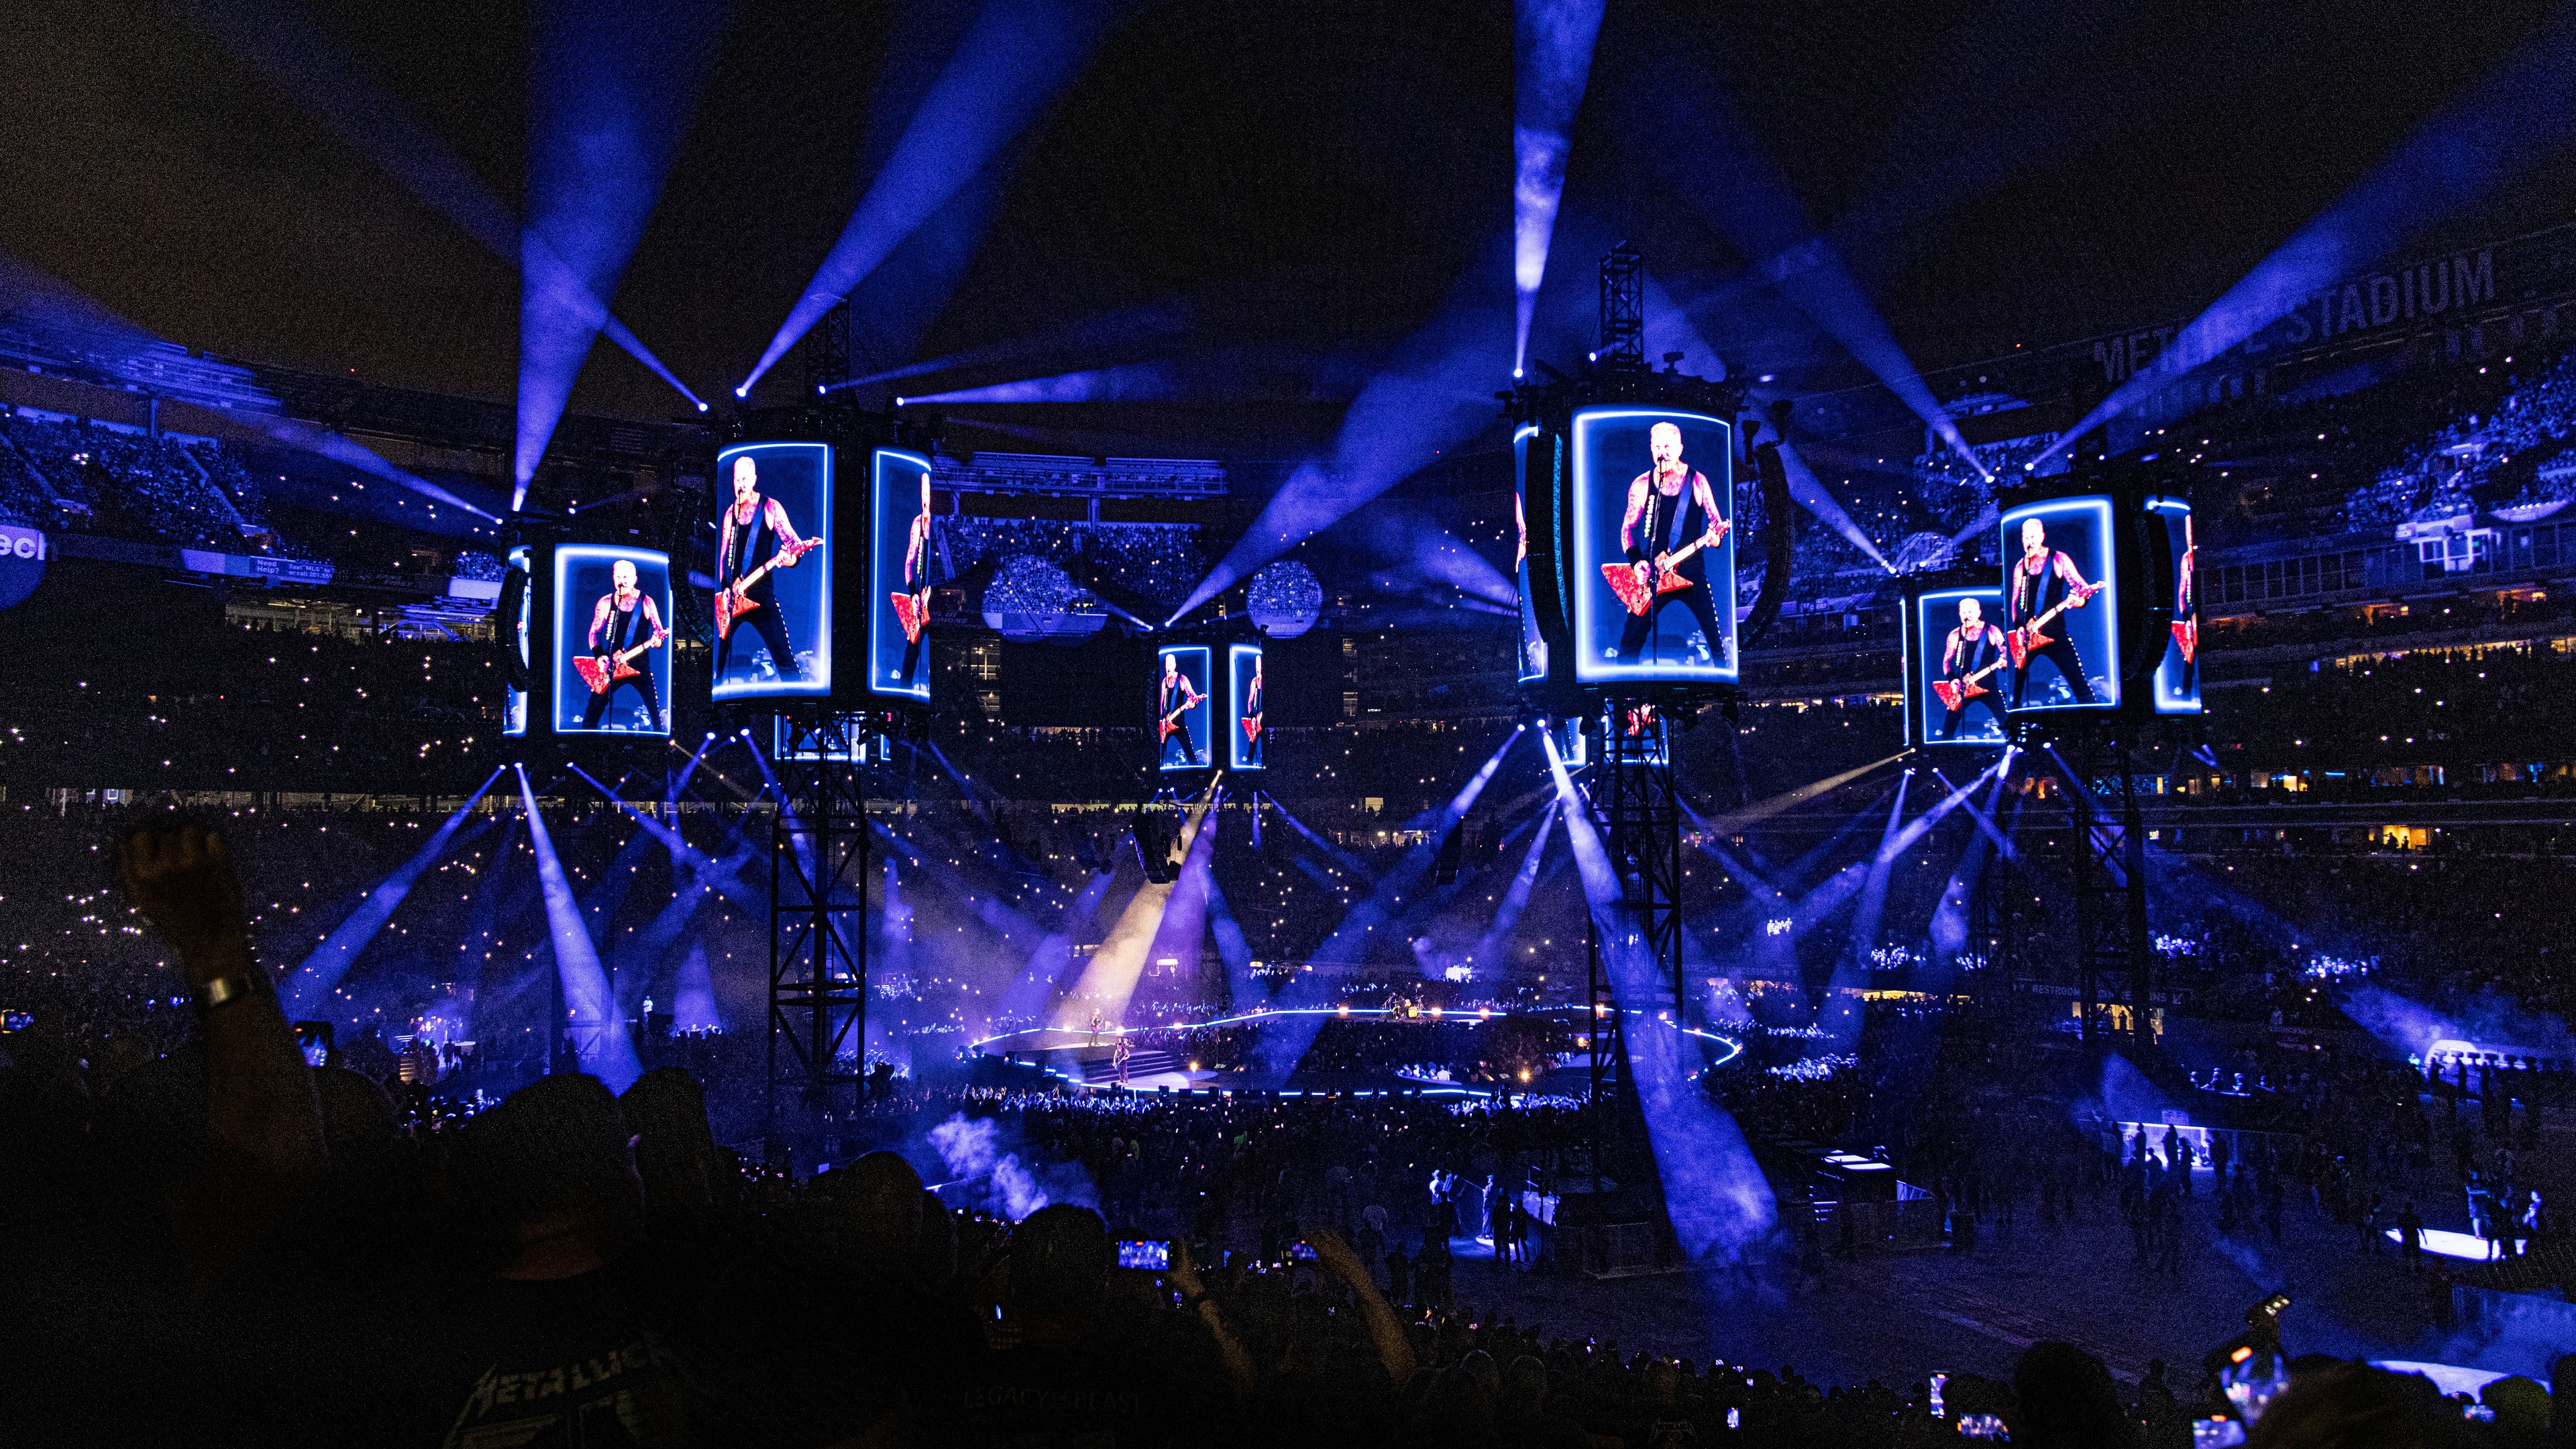 Metallica M72 Tour stage lit up blue with LED screens showing band